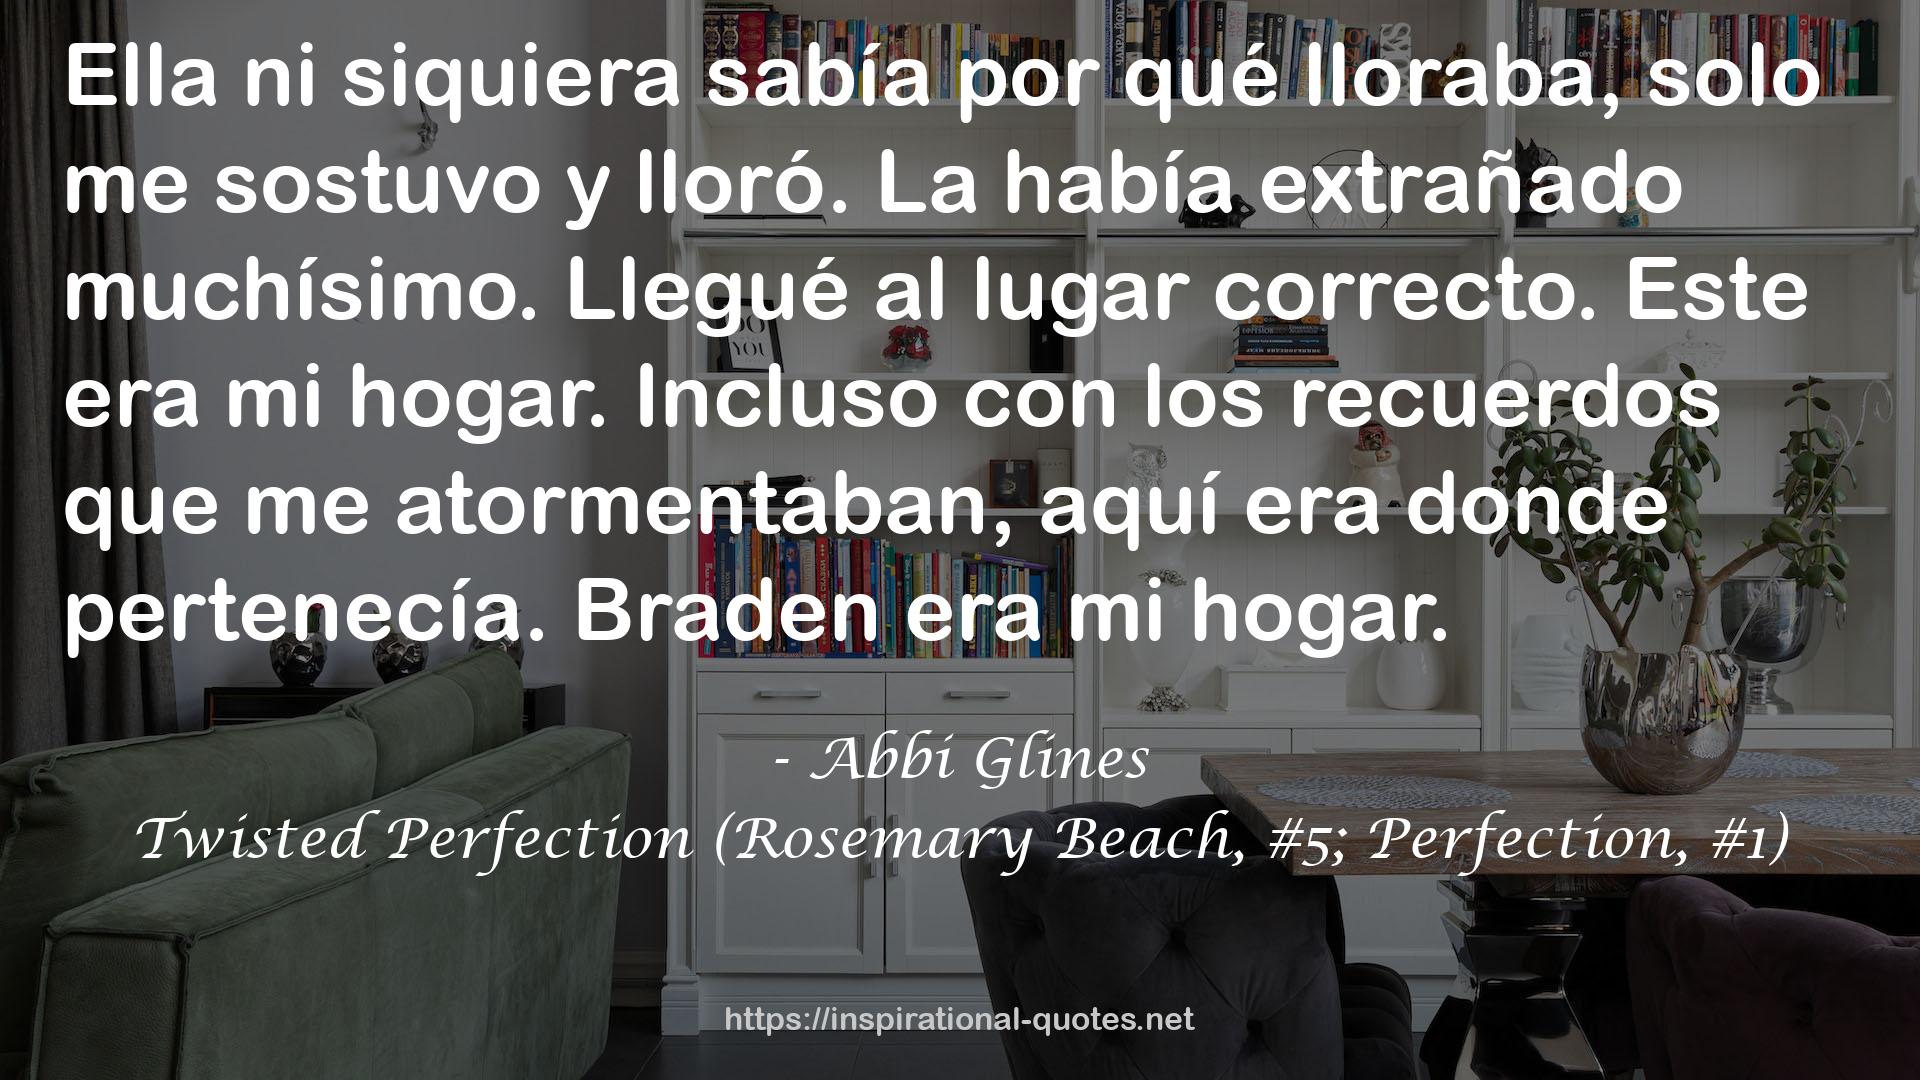 Twisted Perfection (Rosemary Beach, #5; Perfection, #1) QUOTES